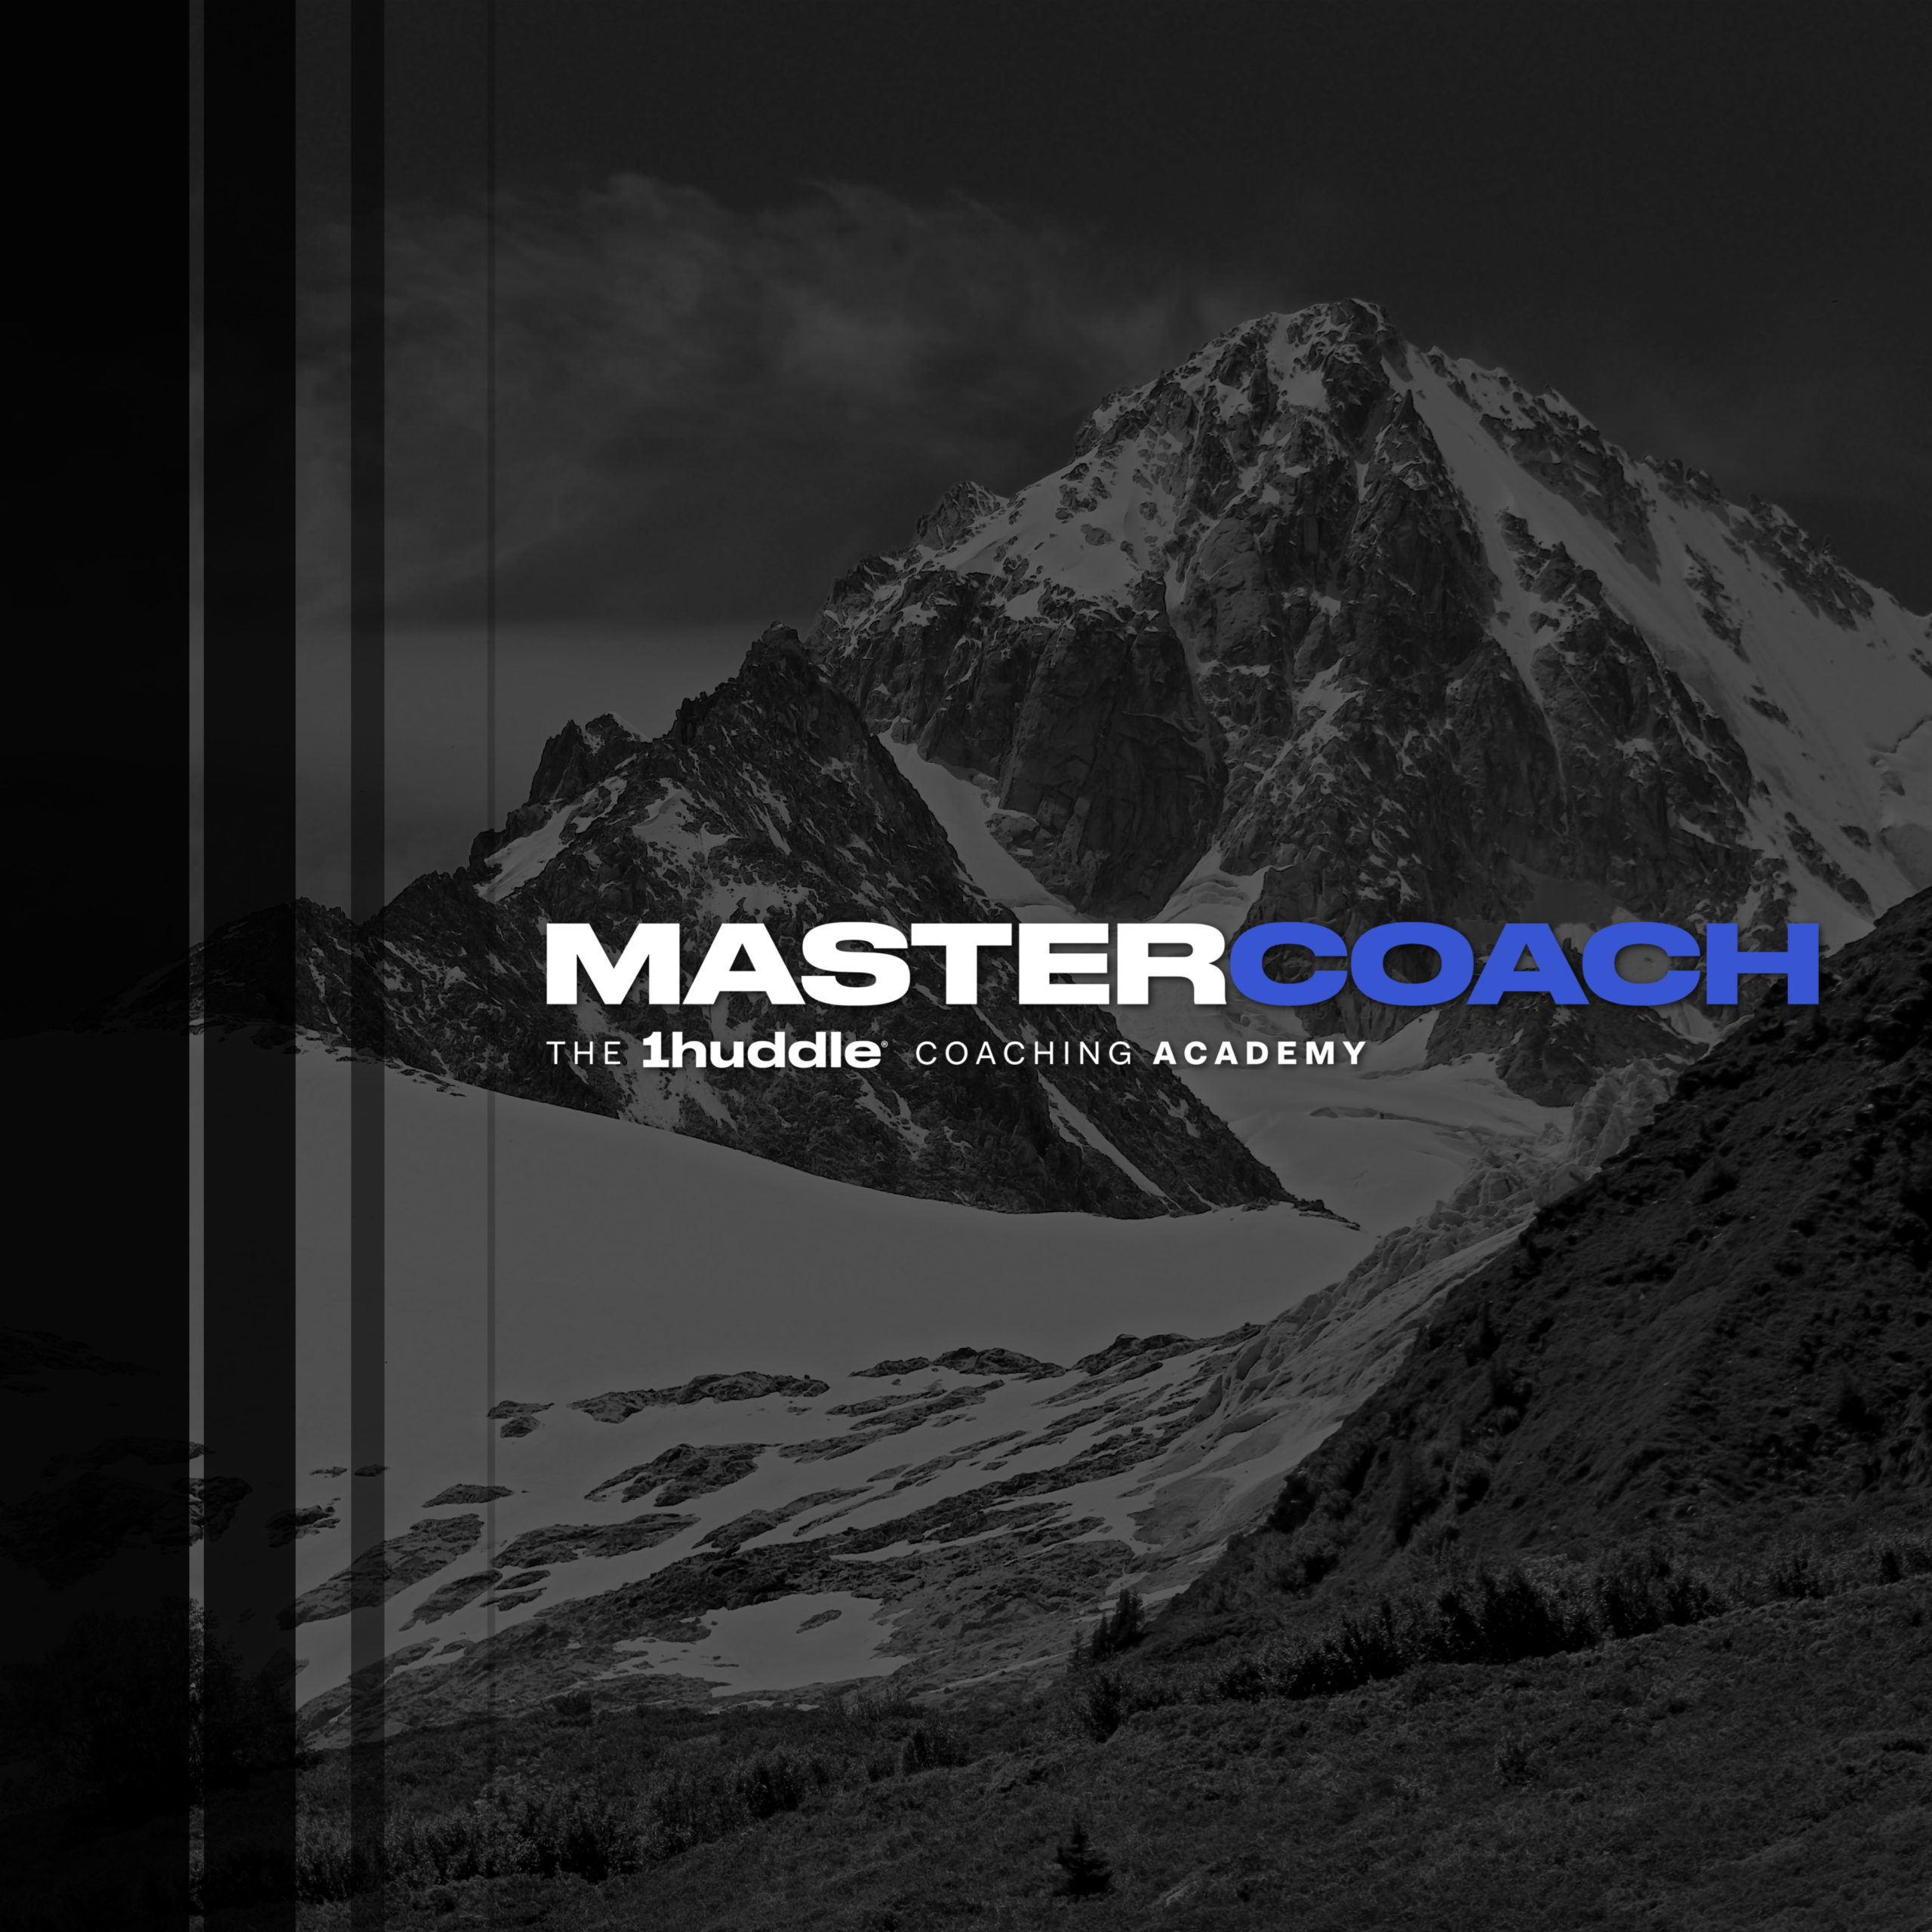 MasterCoach is Back!